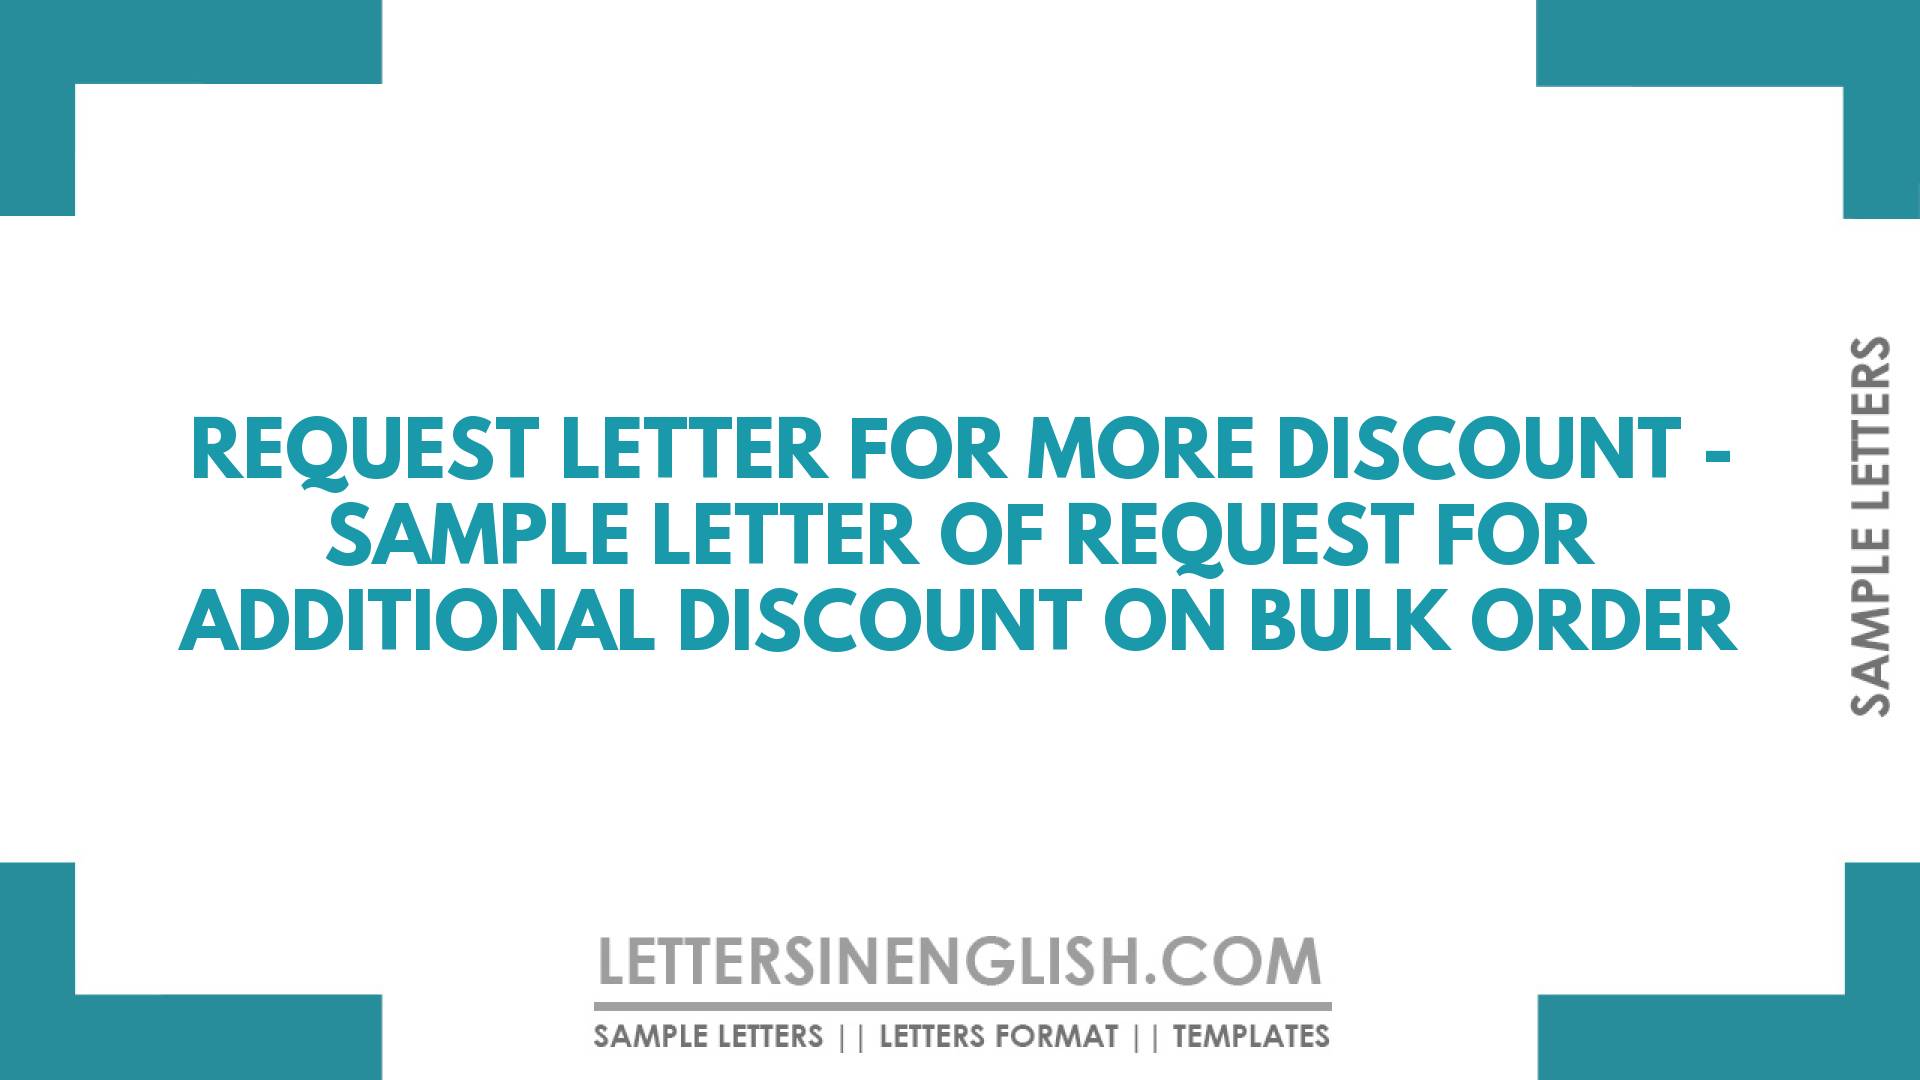 Request Letter for More Discount – Sample Letter of Request for Additional Discount on Bulk Order